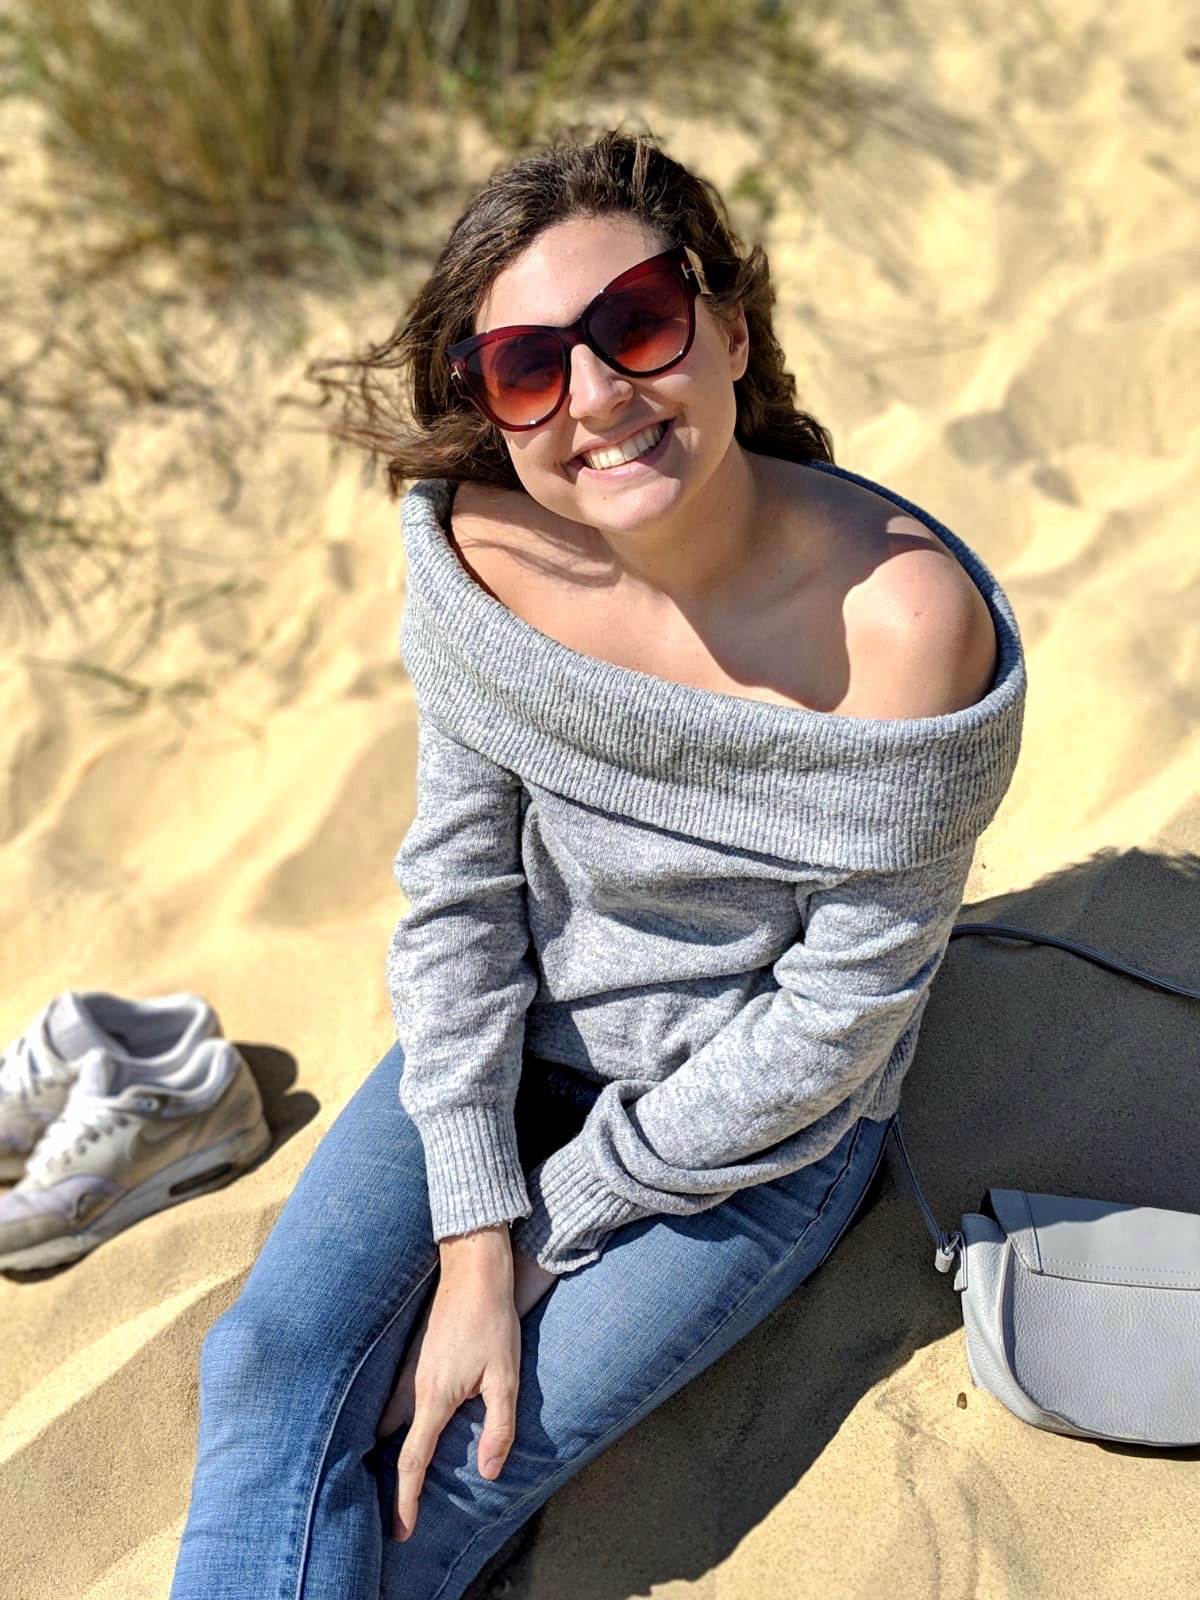 Things to do in Southwold: Nell sand on a sandy beach smiling up at the camera